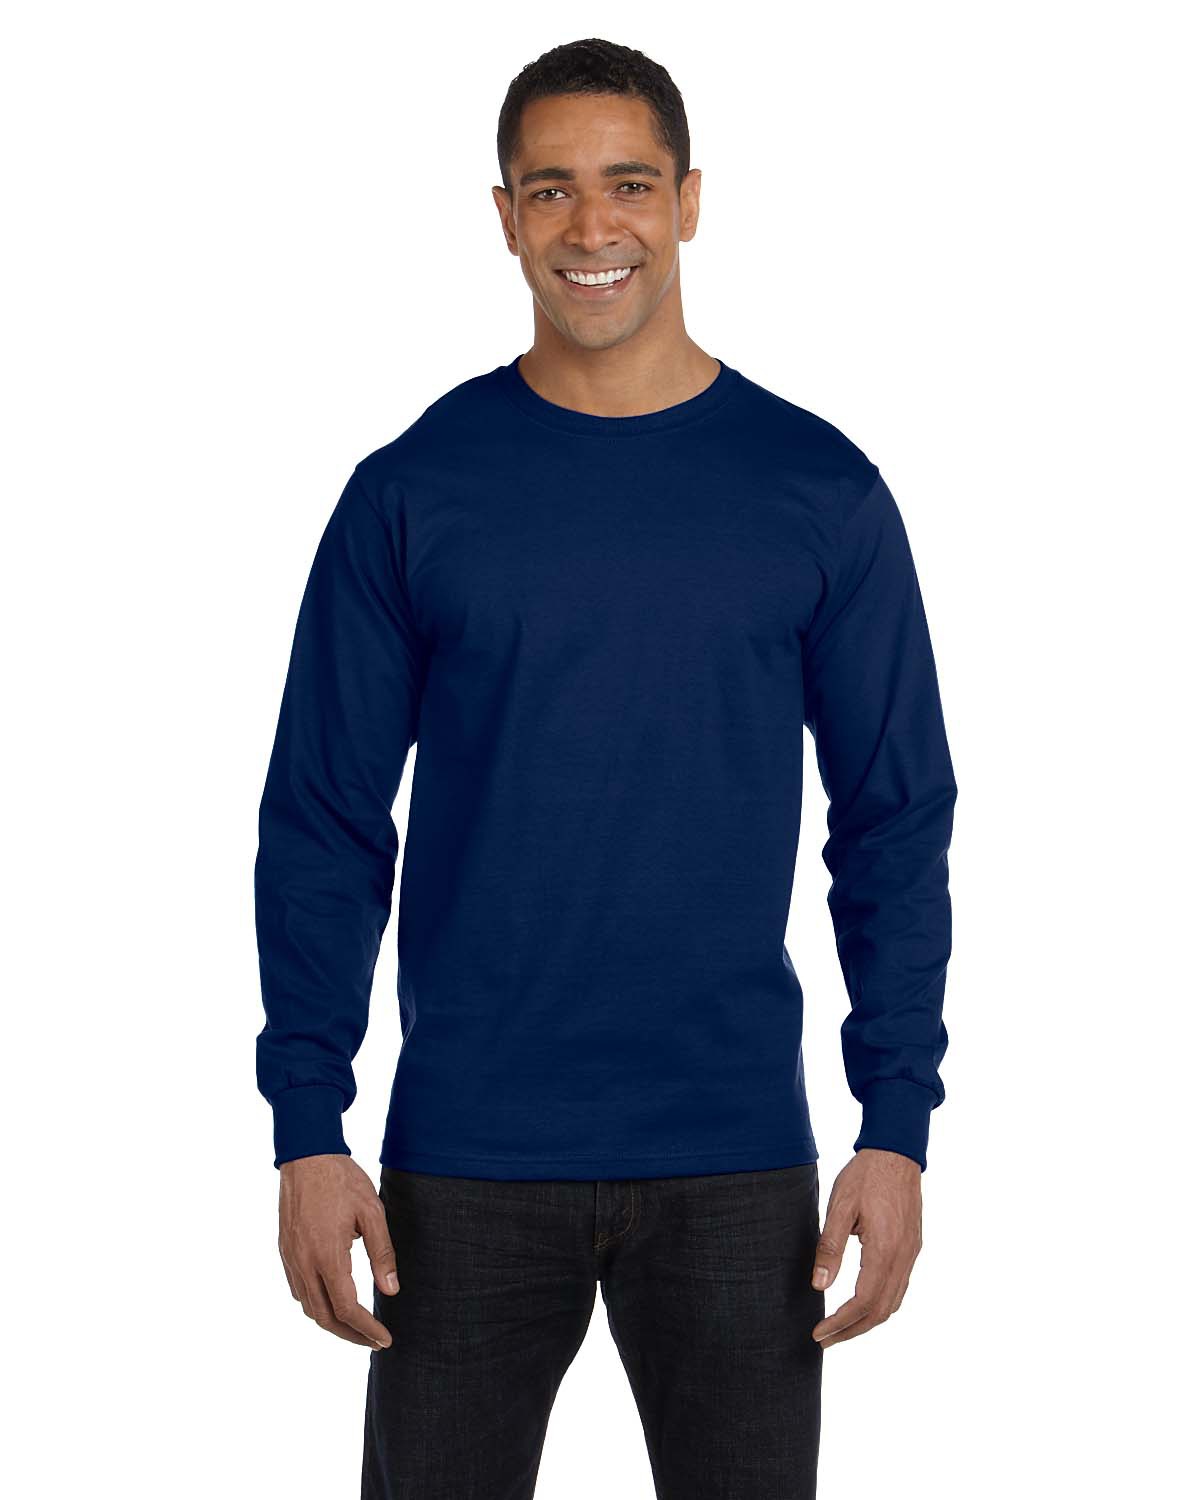 One Industries Tech Casual Long Sleeve T-Shirt 32350-003-054 Charcoal, X-Large 